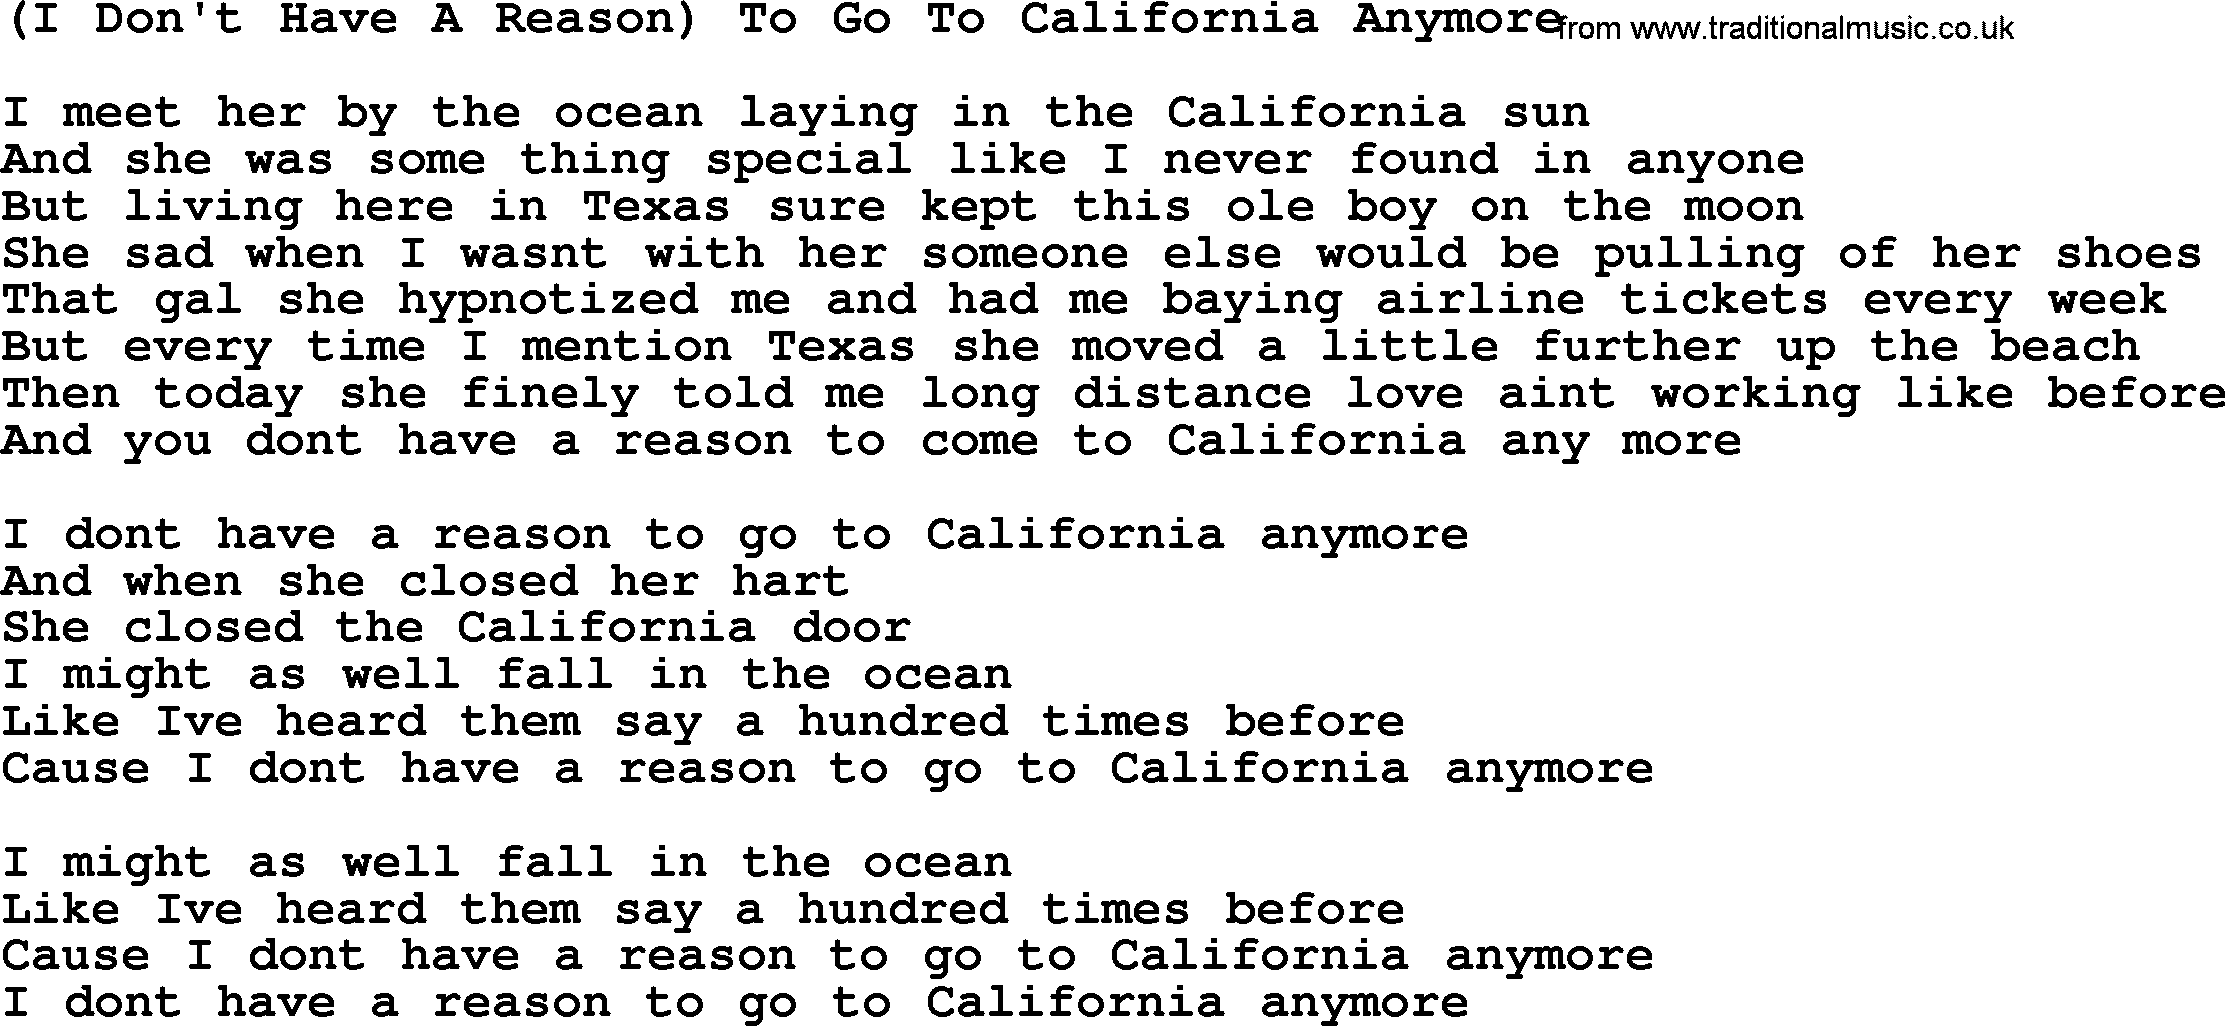 Willie Nelson song: (I Don't Have A Reason) To Go To California Anymore lyrics